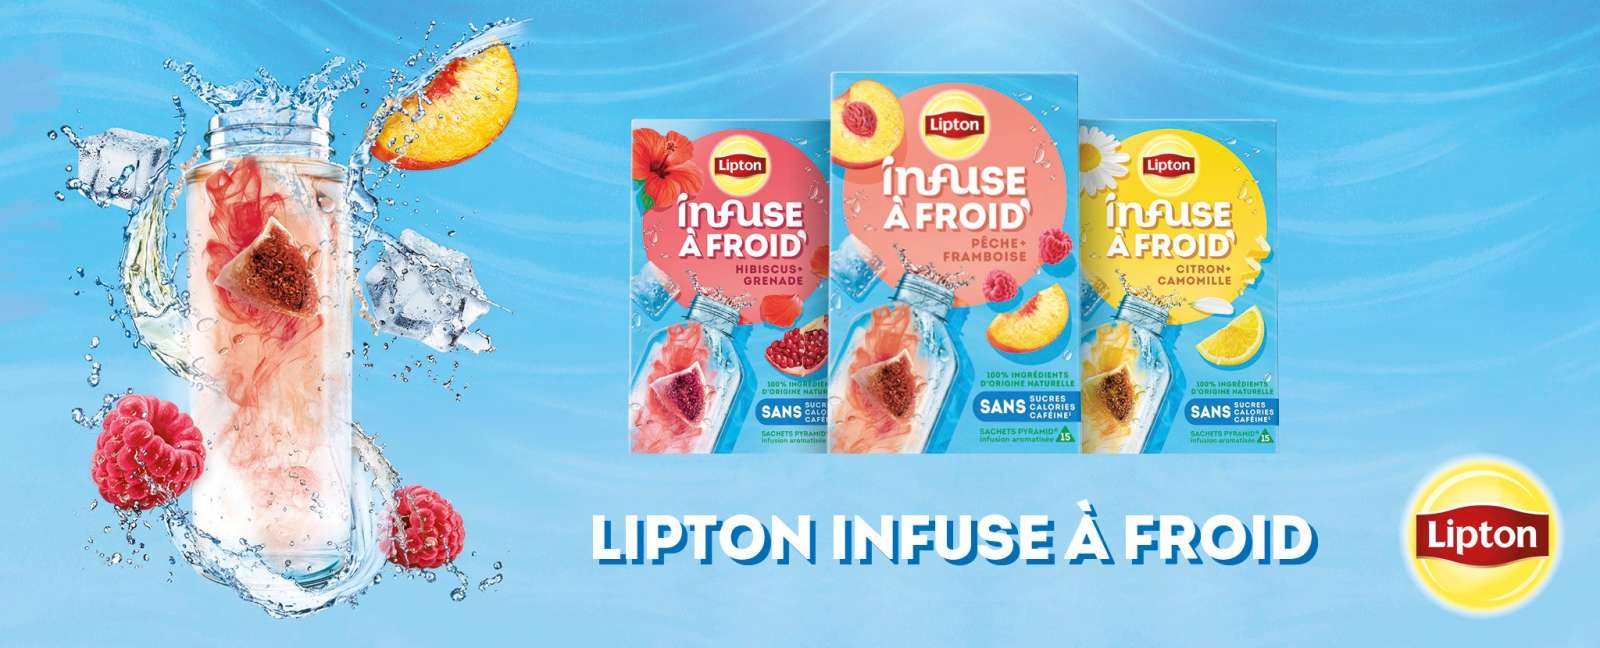 lipton infuse a froid banniere